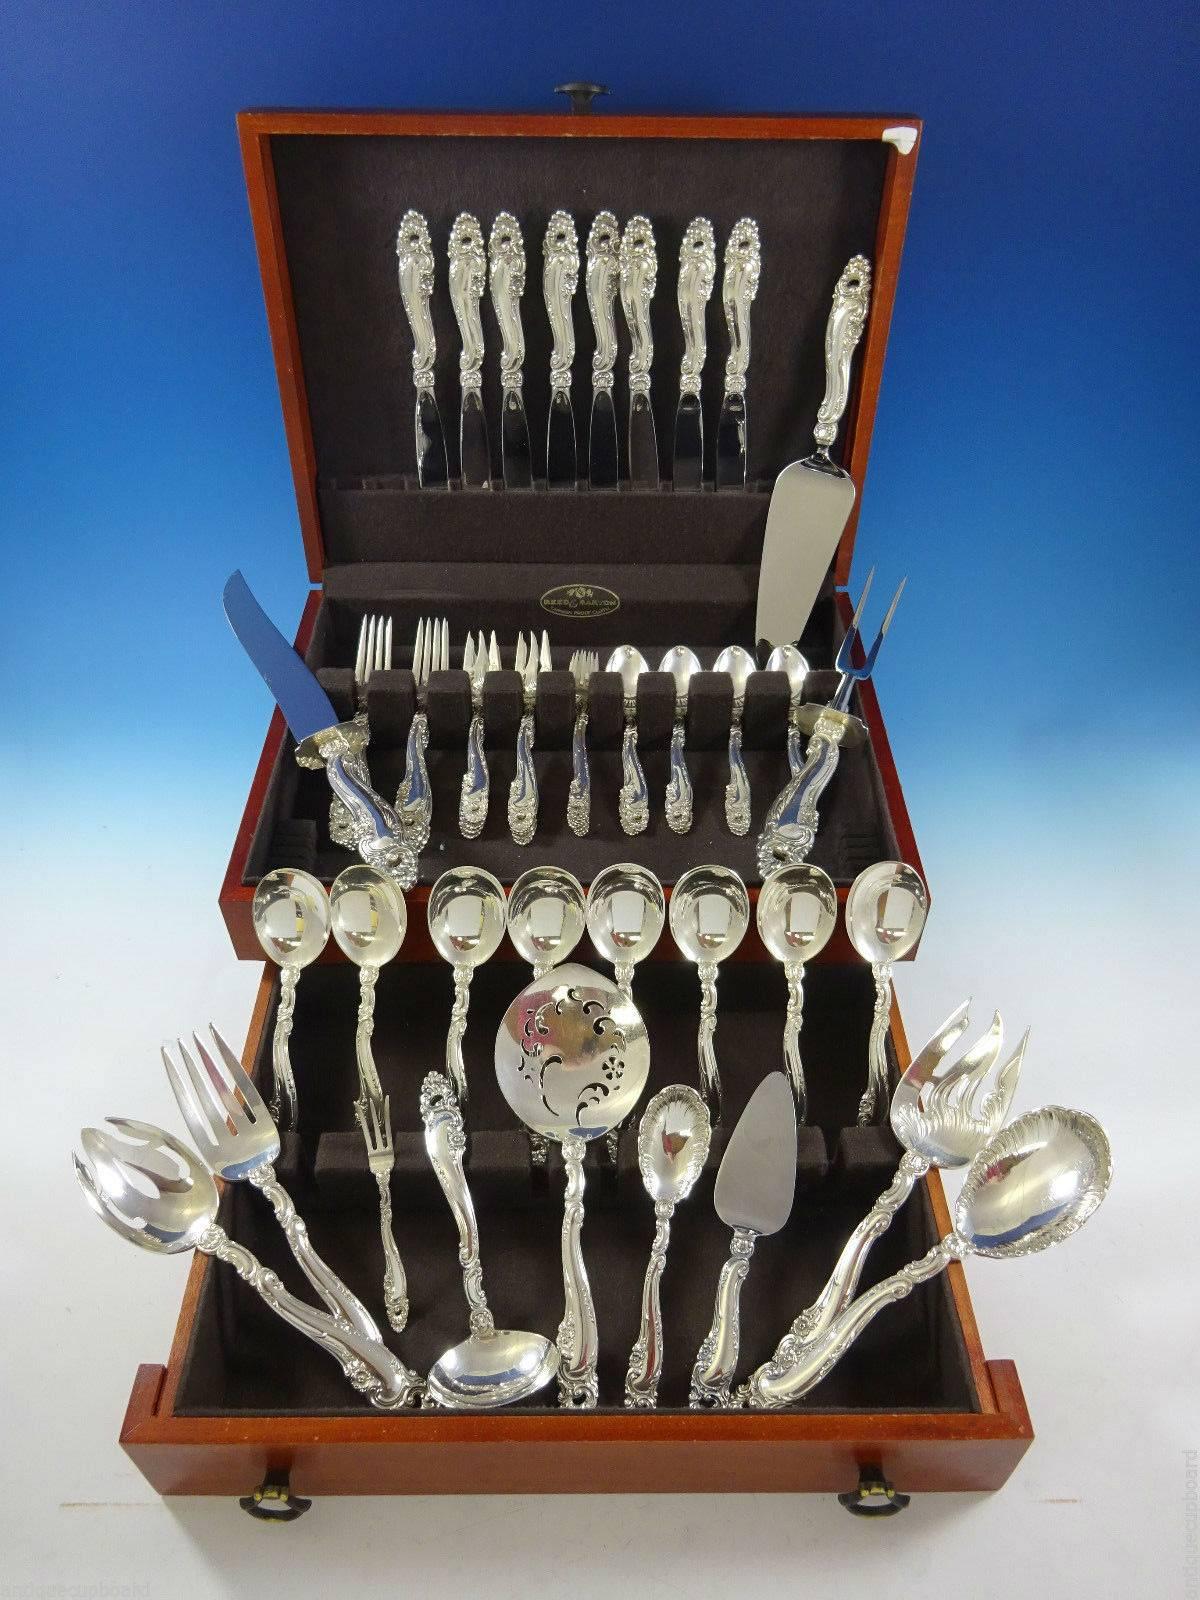 Decor by Gorham sterling silver flatware set, 60 pieces. This pattern is heavy and features Rococo swirls, shells and small flowers. This set includes: 

Eight knives, 9